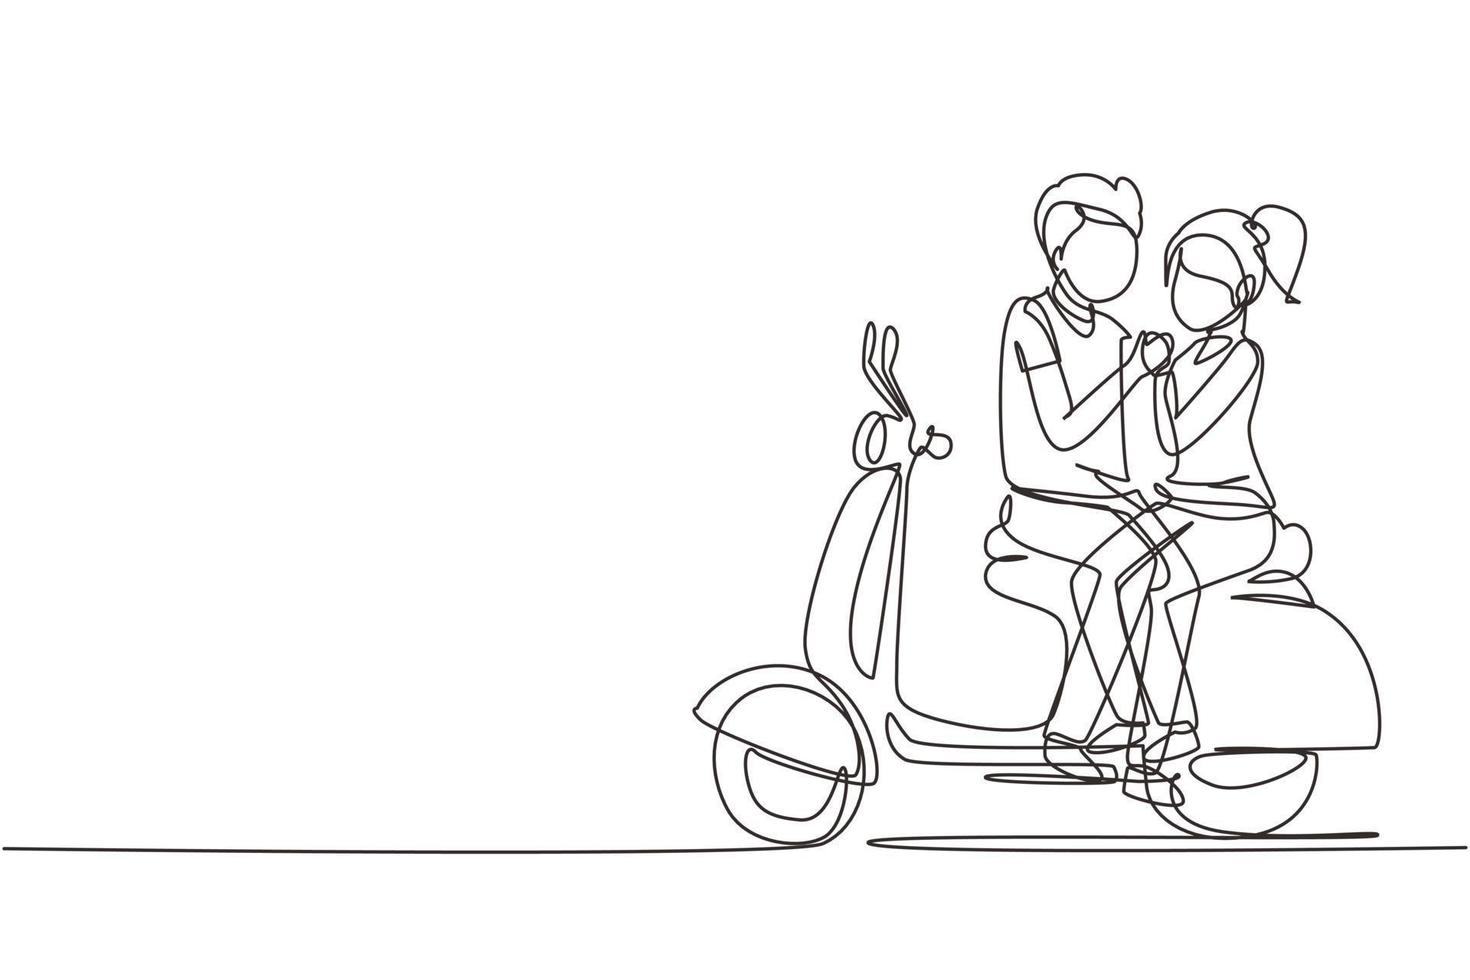 Single one line drawing riders couple trip travel relax. Romantic honeymoon moments sitting and talking on motorcycle. Man with woman riding scooter. Modern continuous line draw design graphic vector